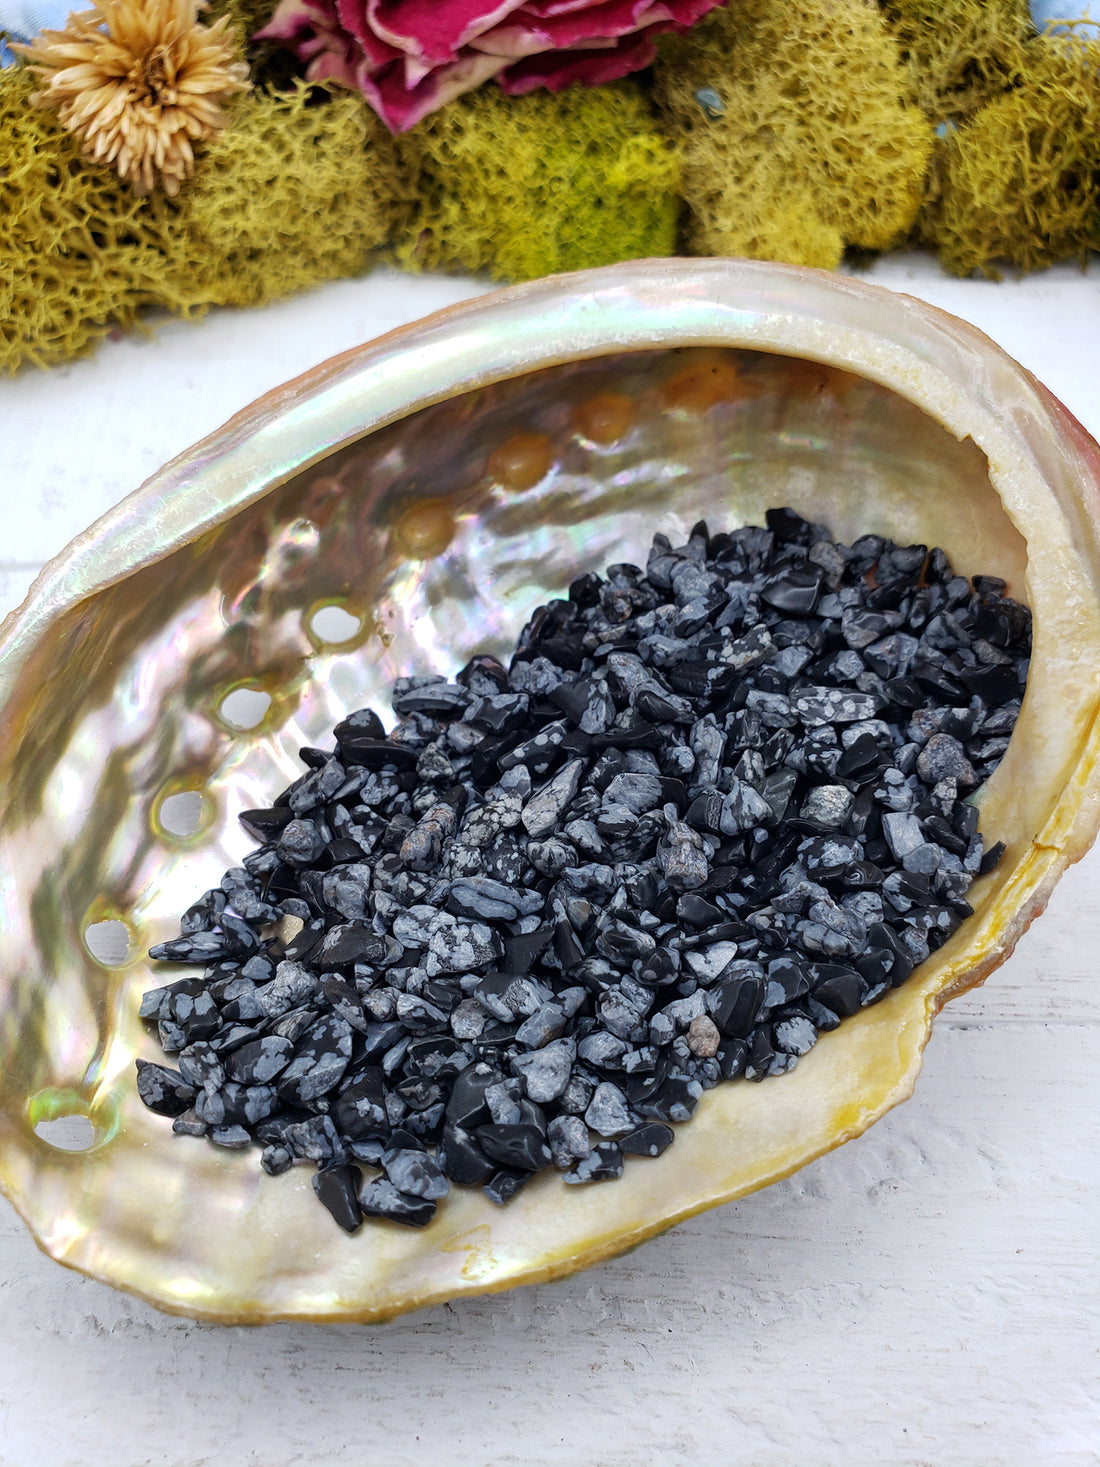 one ounce of snowflake obsidian chips in abalone shell